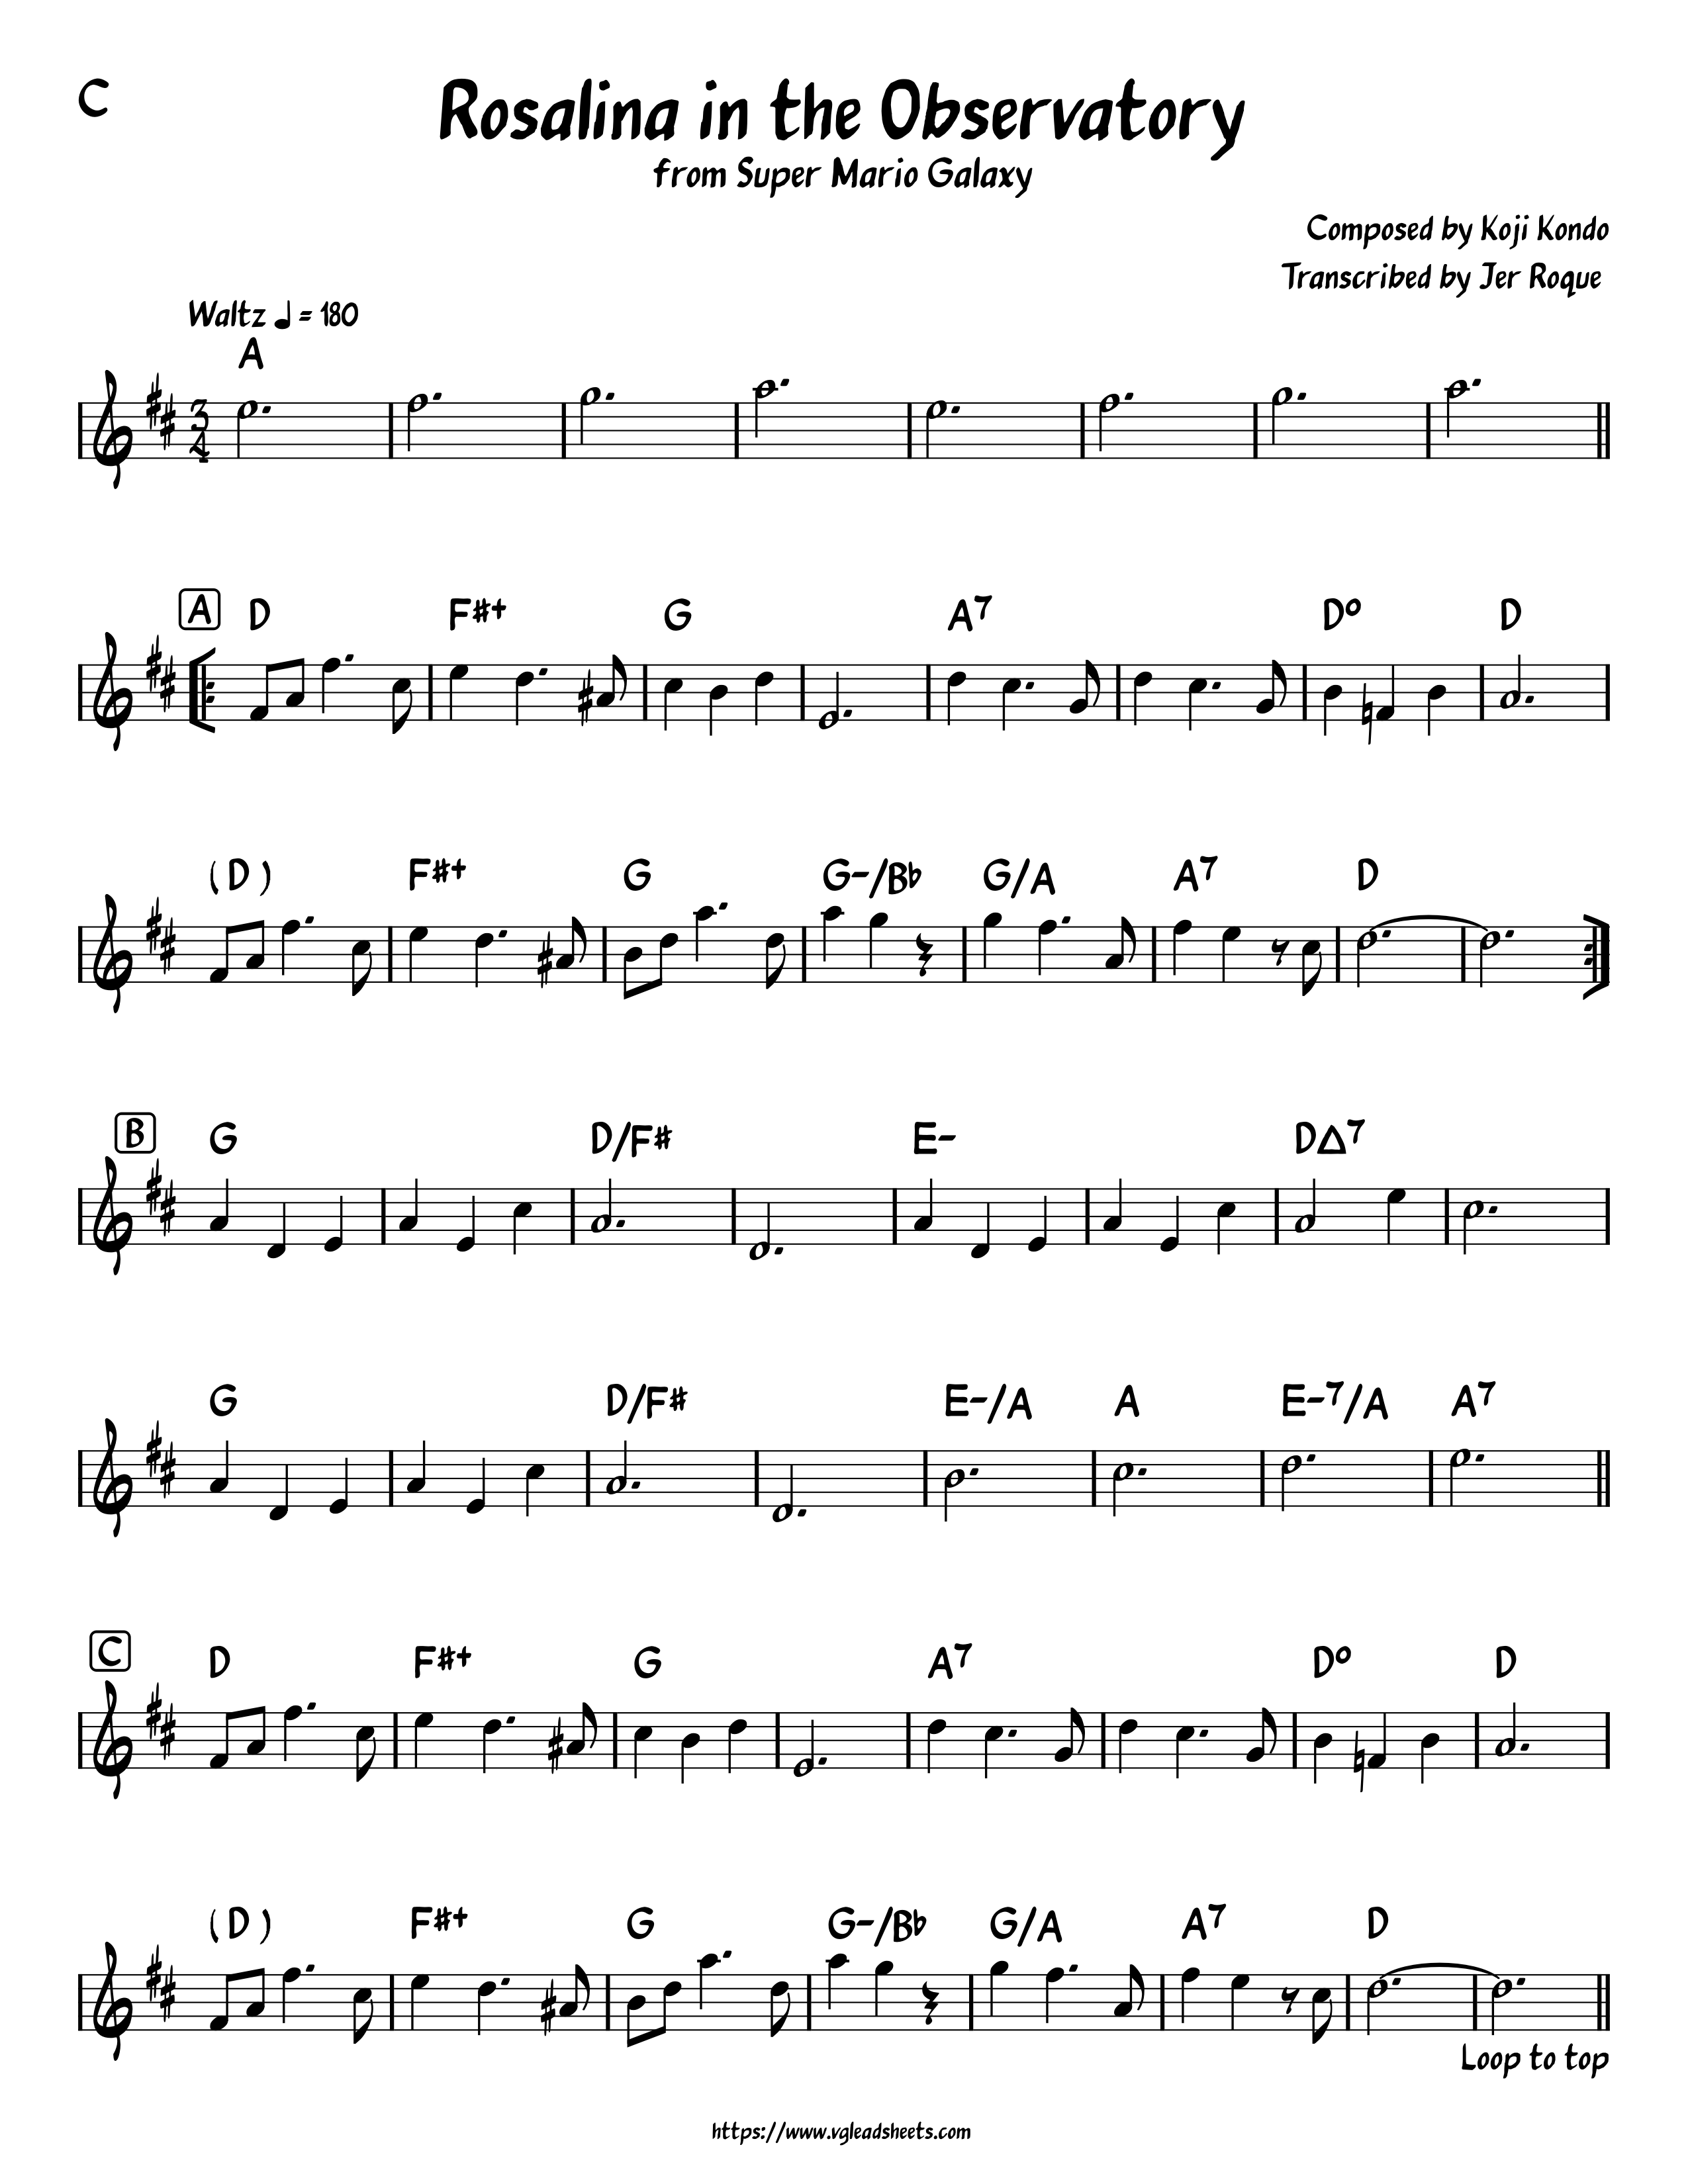 Green Hill Zone Sheet Music - 17 Arrangements Available Instantly -  Musicnotes